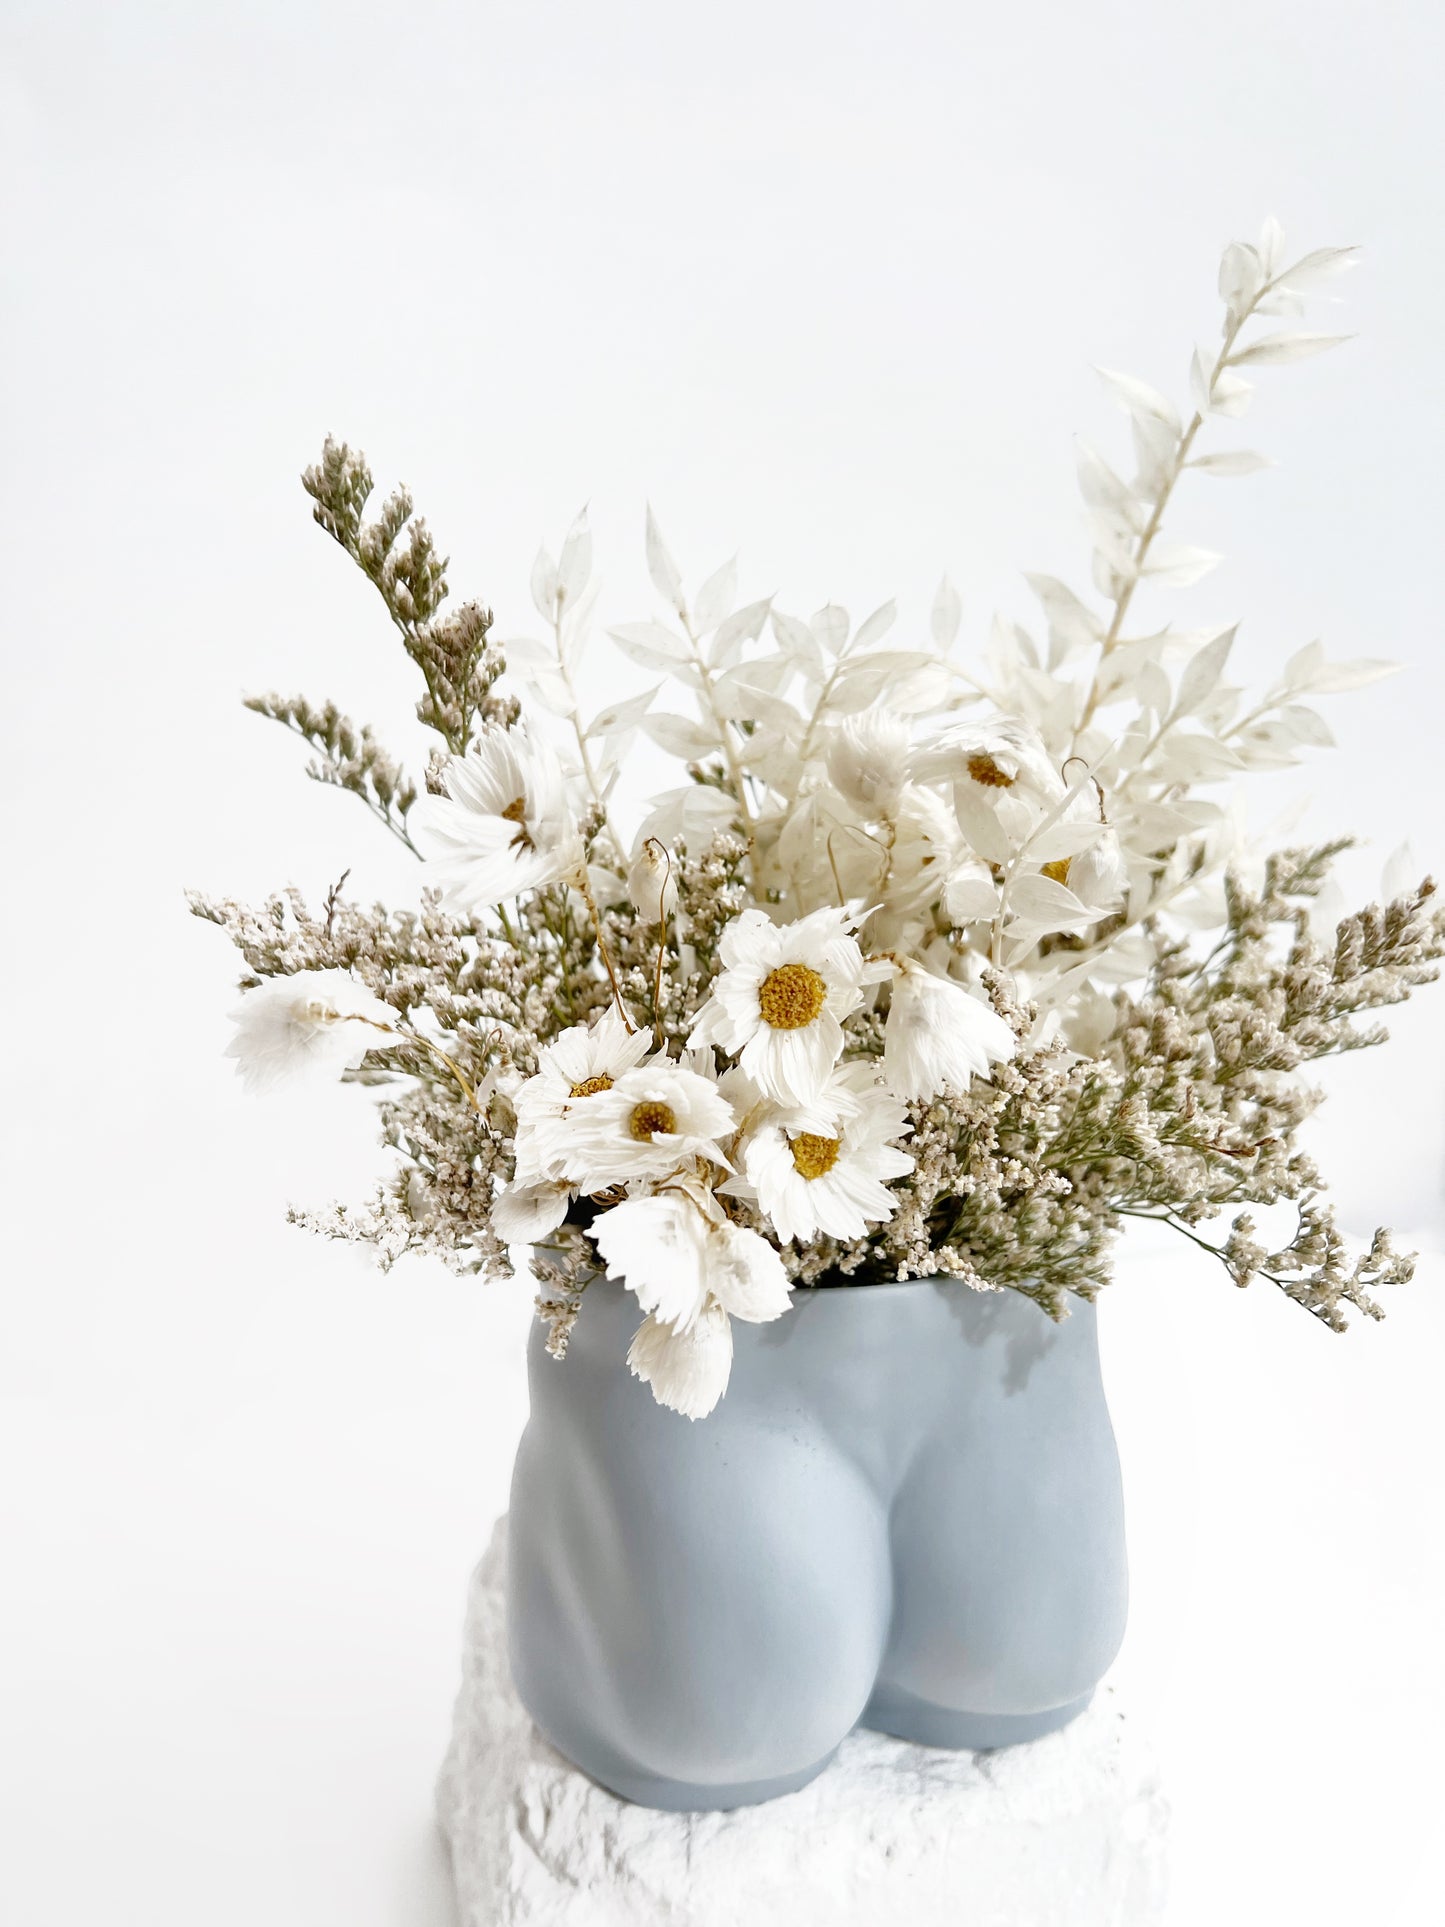 An everlasting flower arrangement in white dainty dried and preserved florals in our soft blue tush vase from Jones and Co, handmade fine porcelain